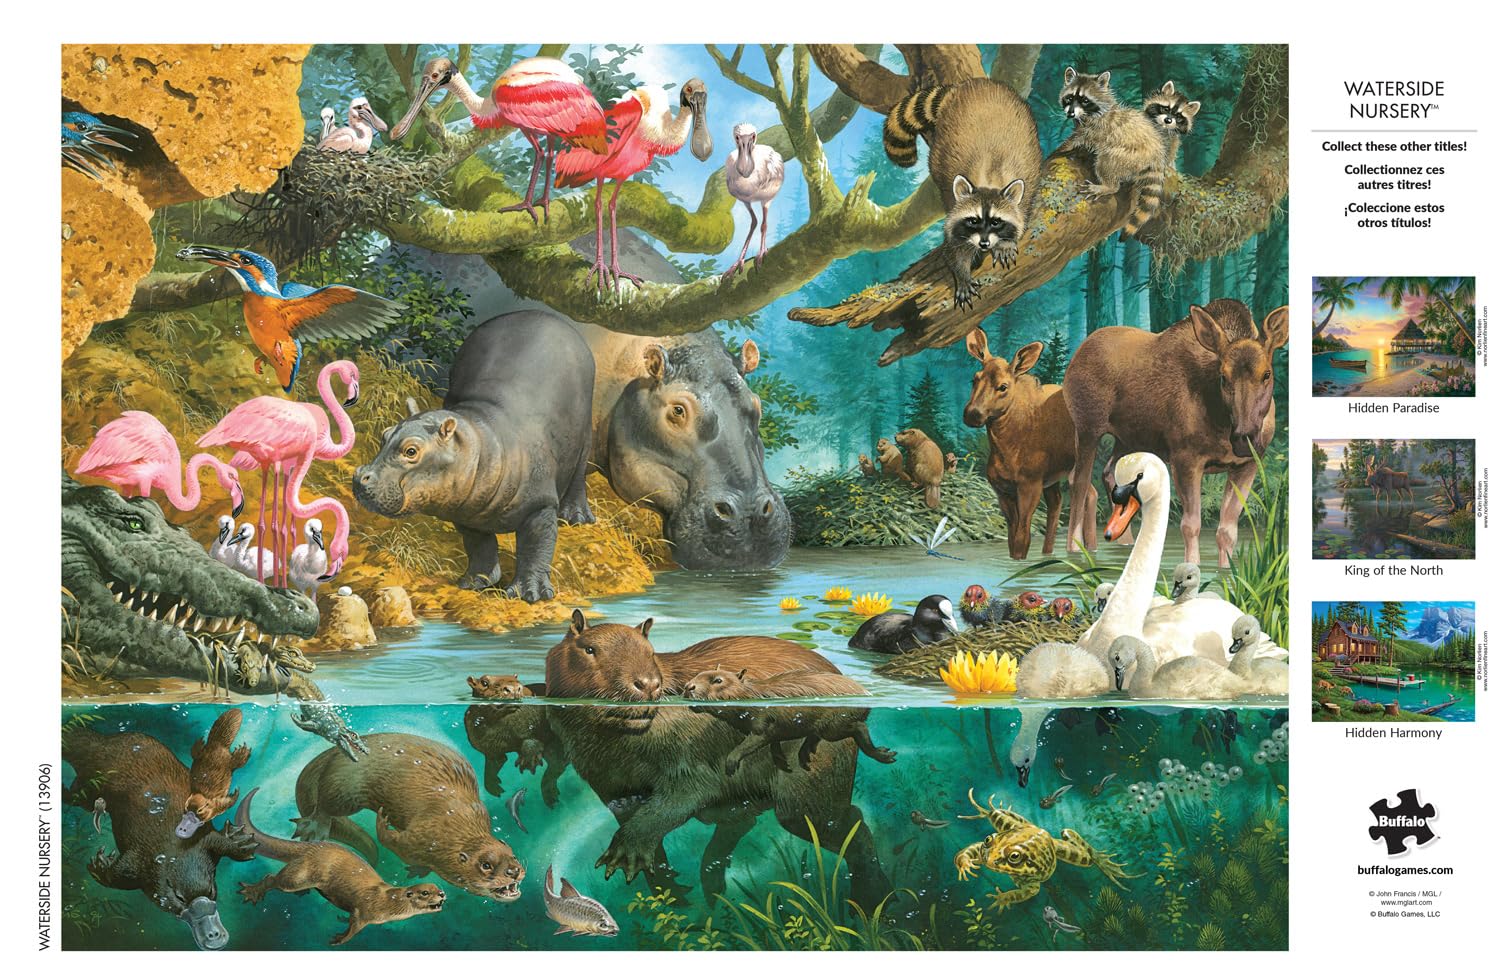 Buffalo Games - Waterside Nursery - 1000 Piece Jigsaw Puzzle for Adults Challenging Puzzle Perfect for Game Nights - Finished Size 26.75 x 19.75